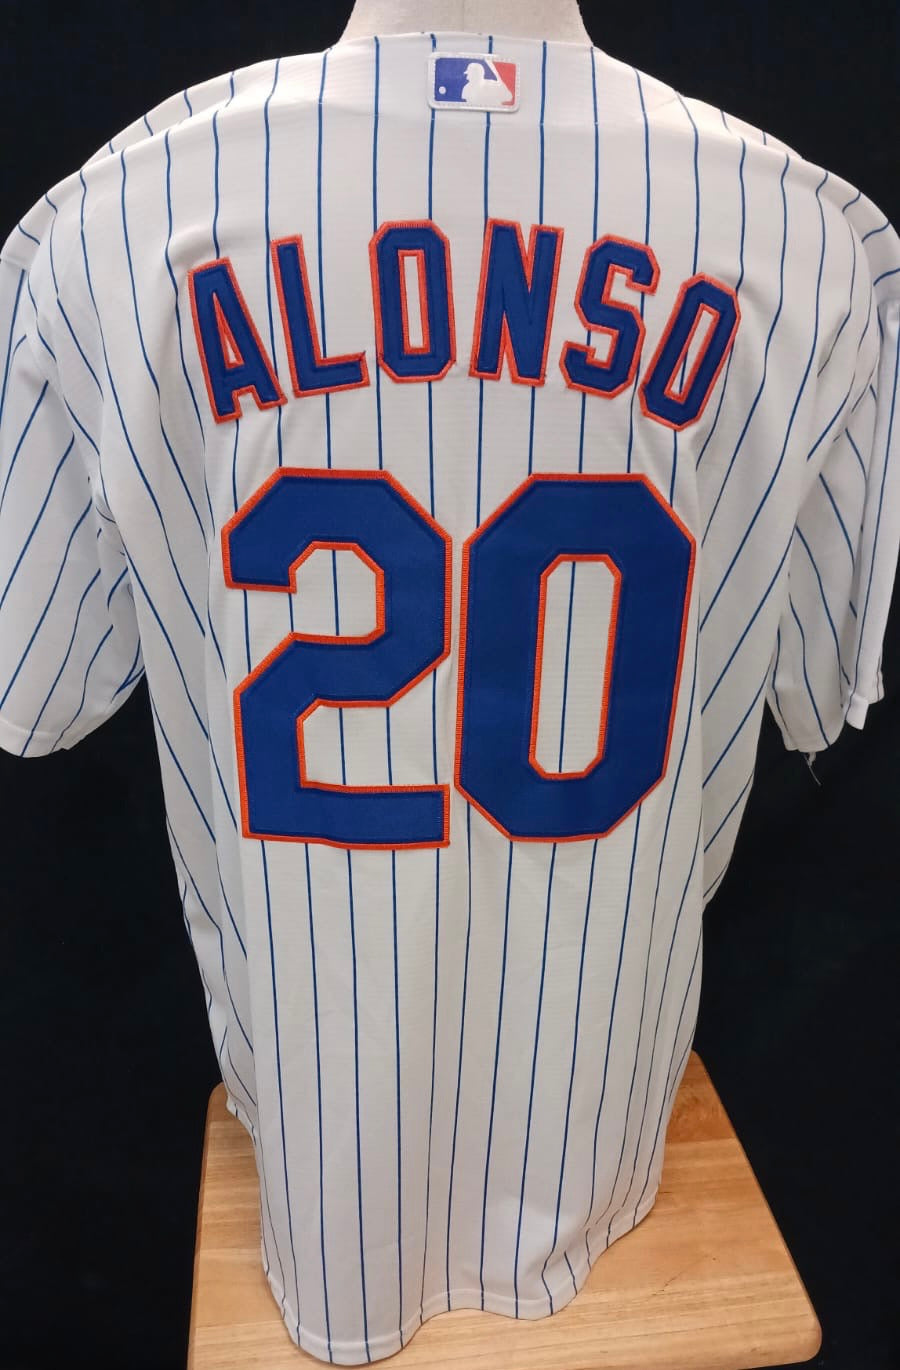 alonso mets jersey